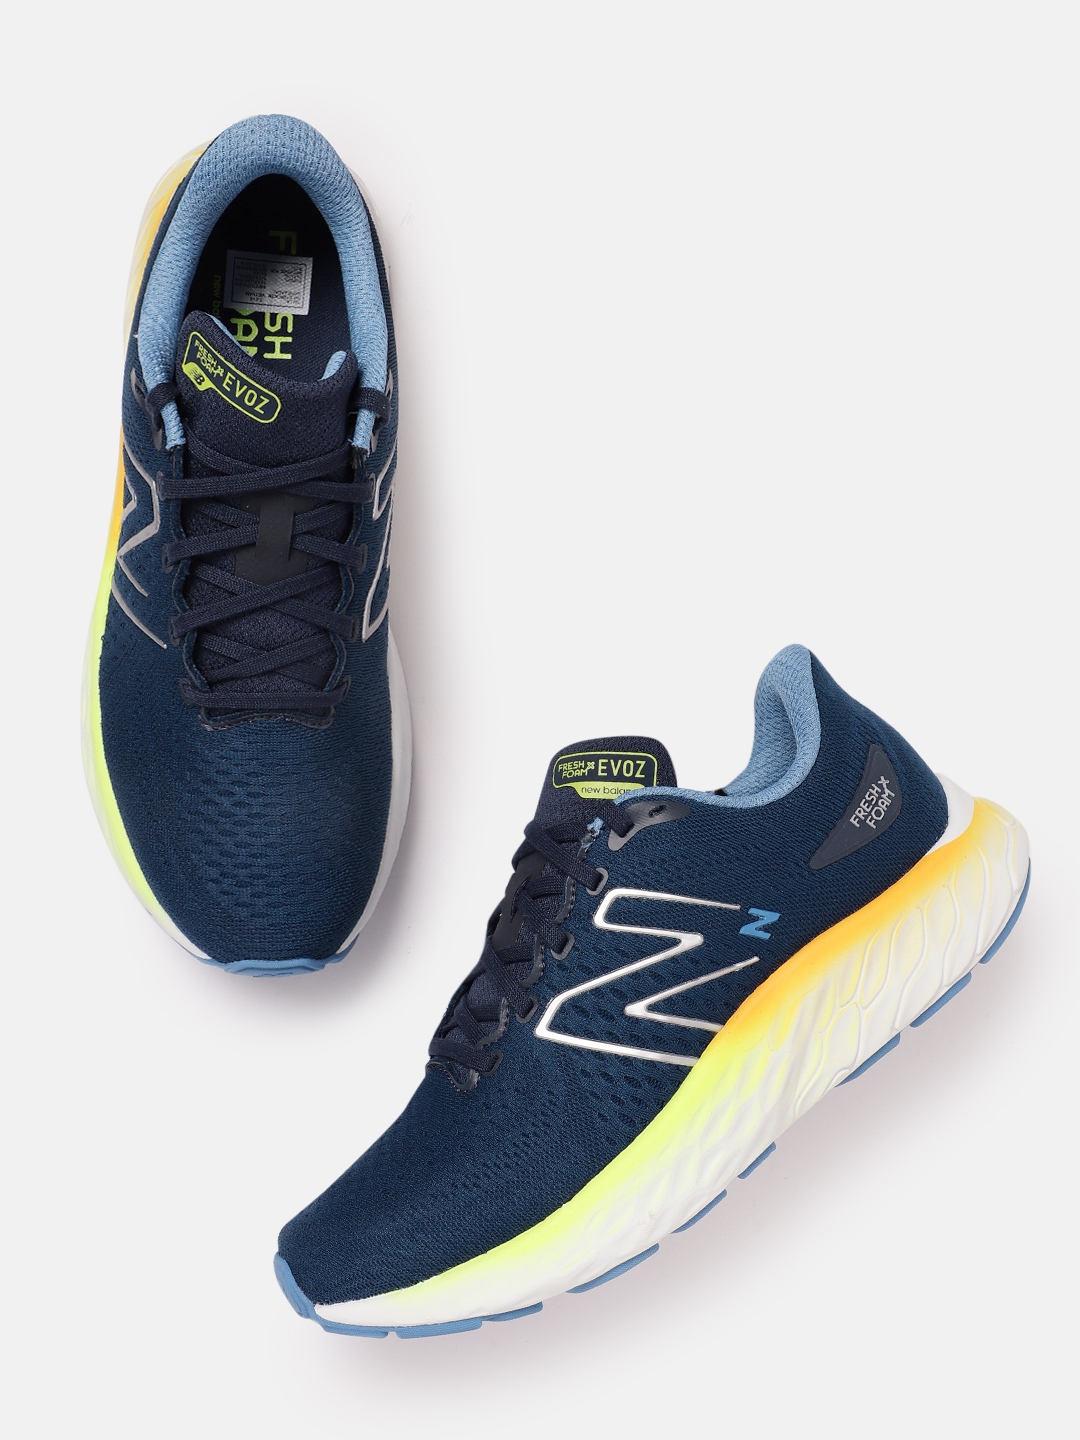 Buy New Balance Men Woven Design Running Shoes - Sports Shoes for